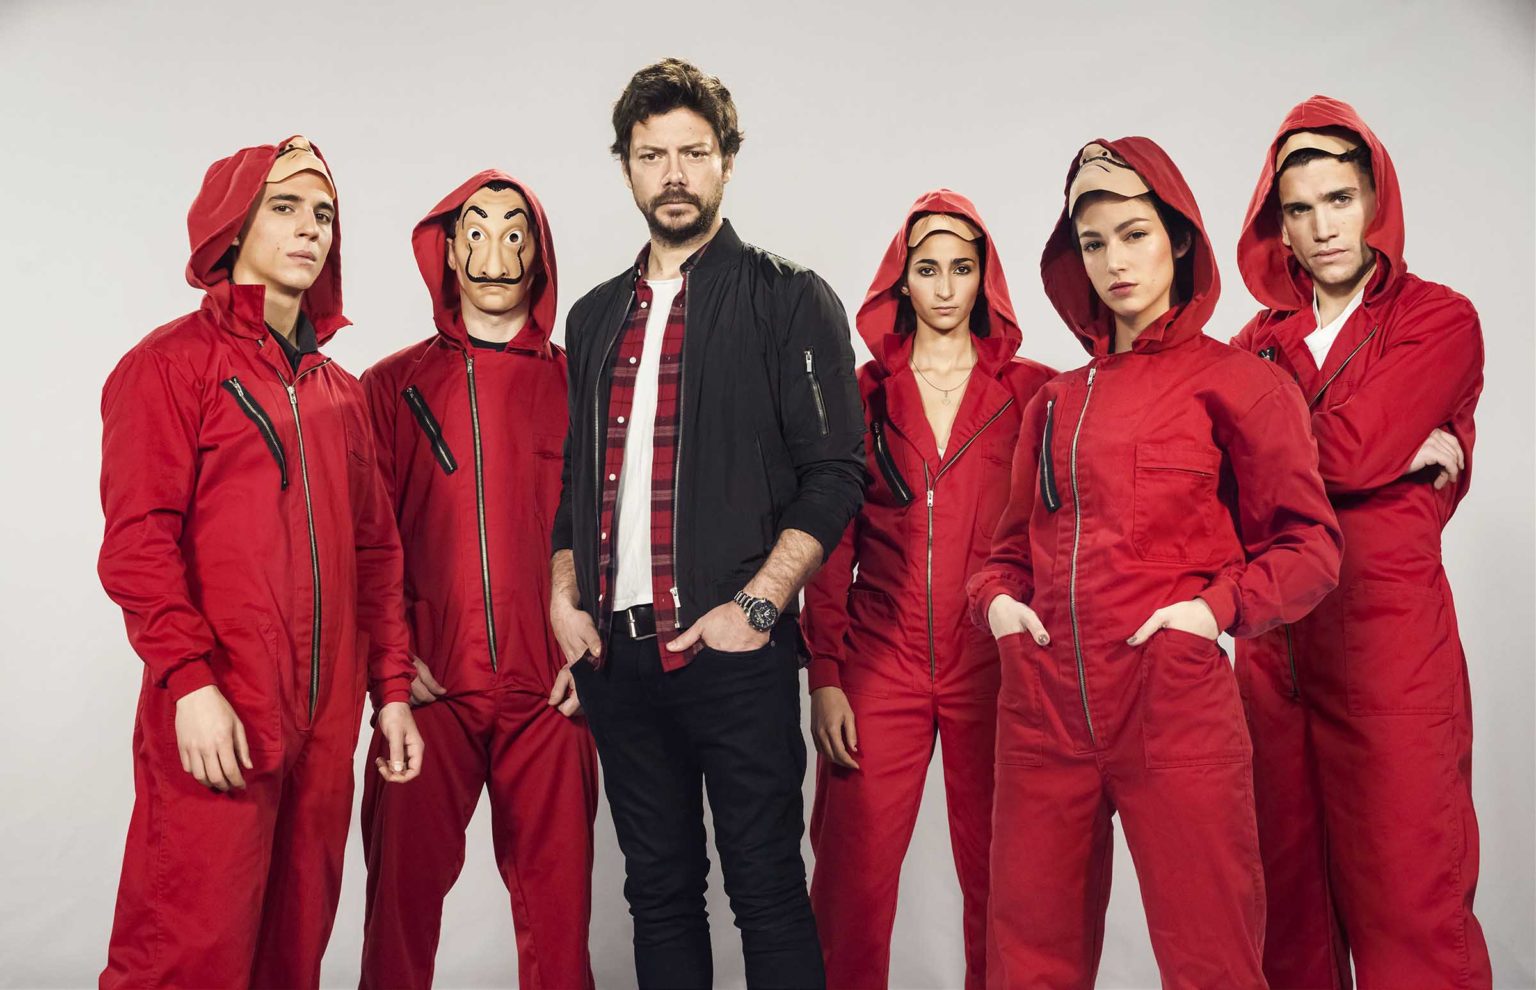 Until season 4 is in our grasp, we’ve got the best memes about 'Money Heist'. We’ll let you keep them free of charge so you don’t have to steal.